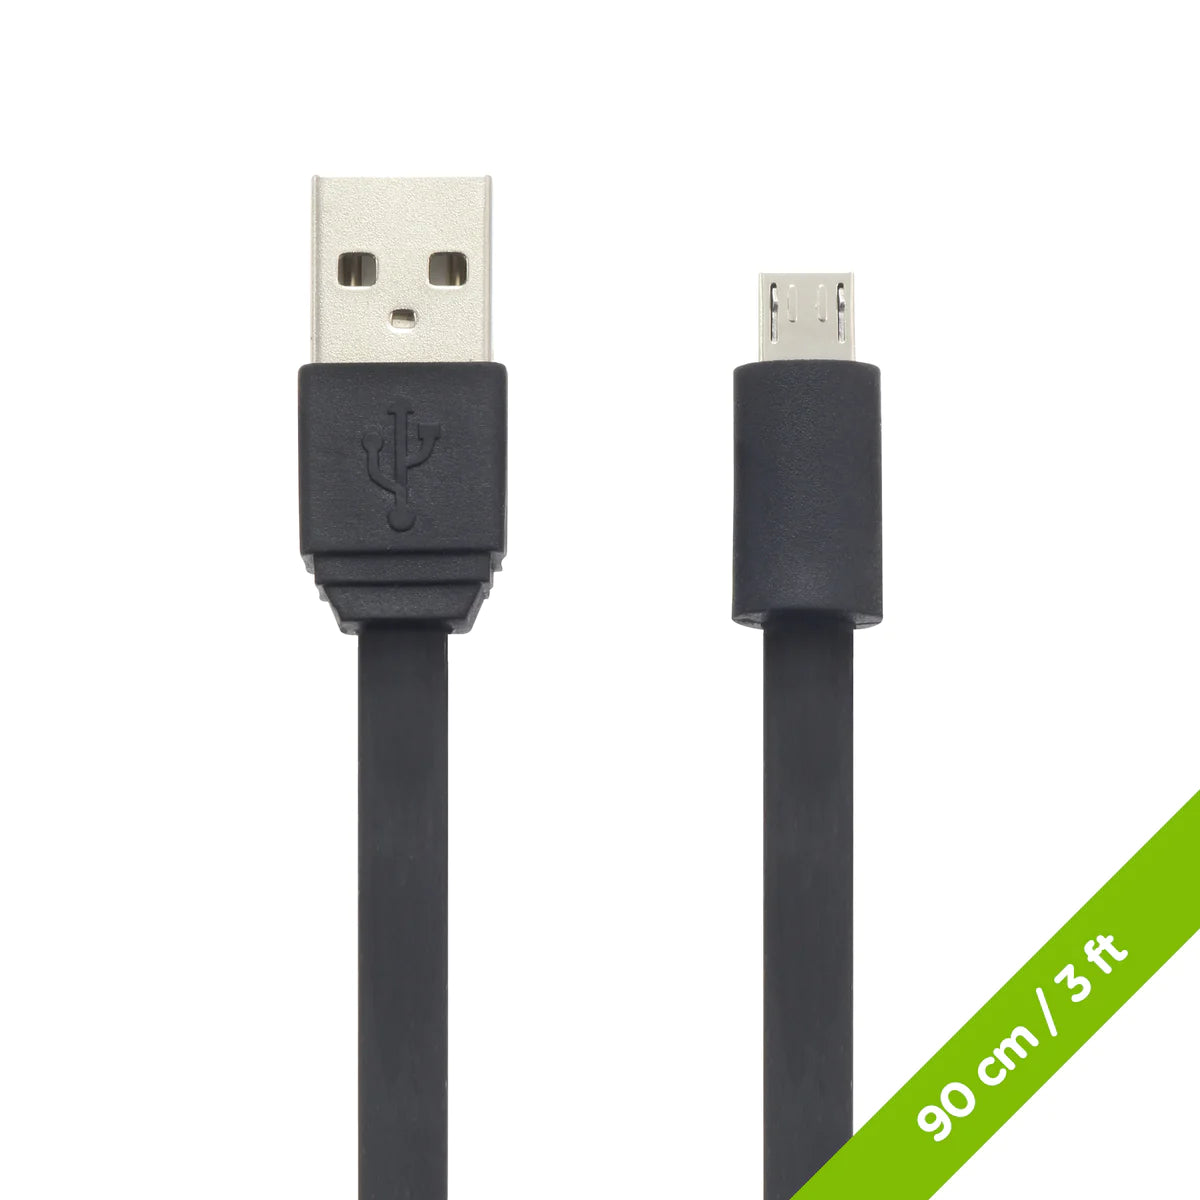 Moki MicroUSB to USB SynCharge Cable 90cm